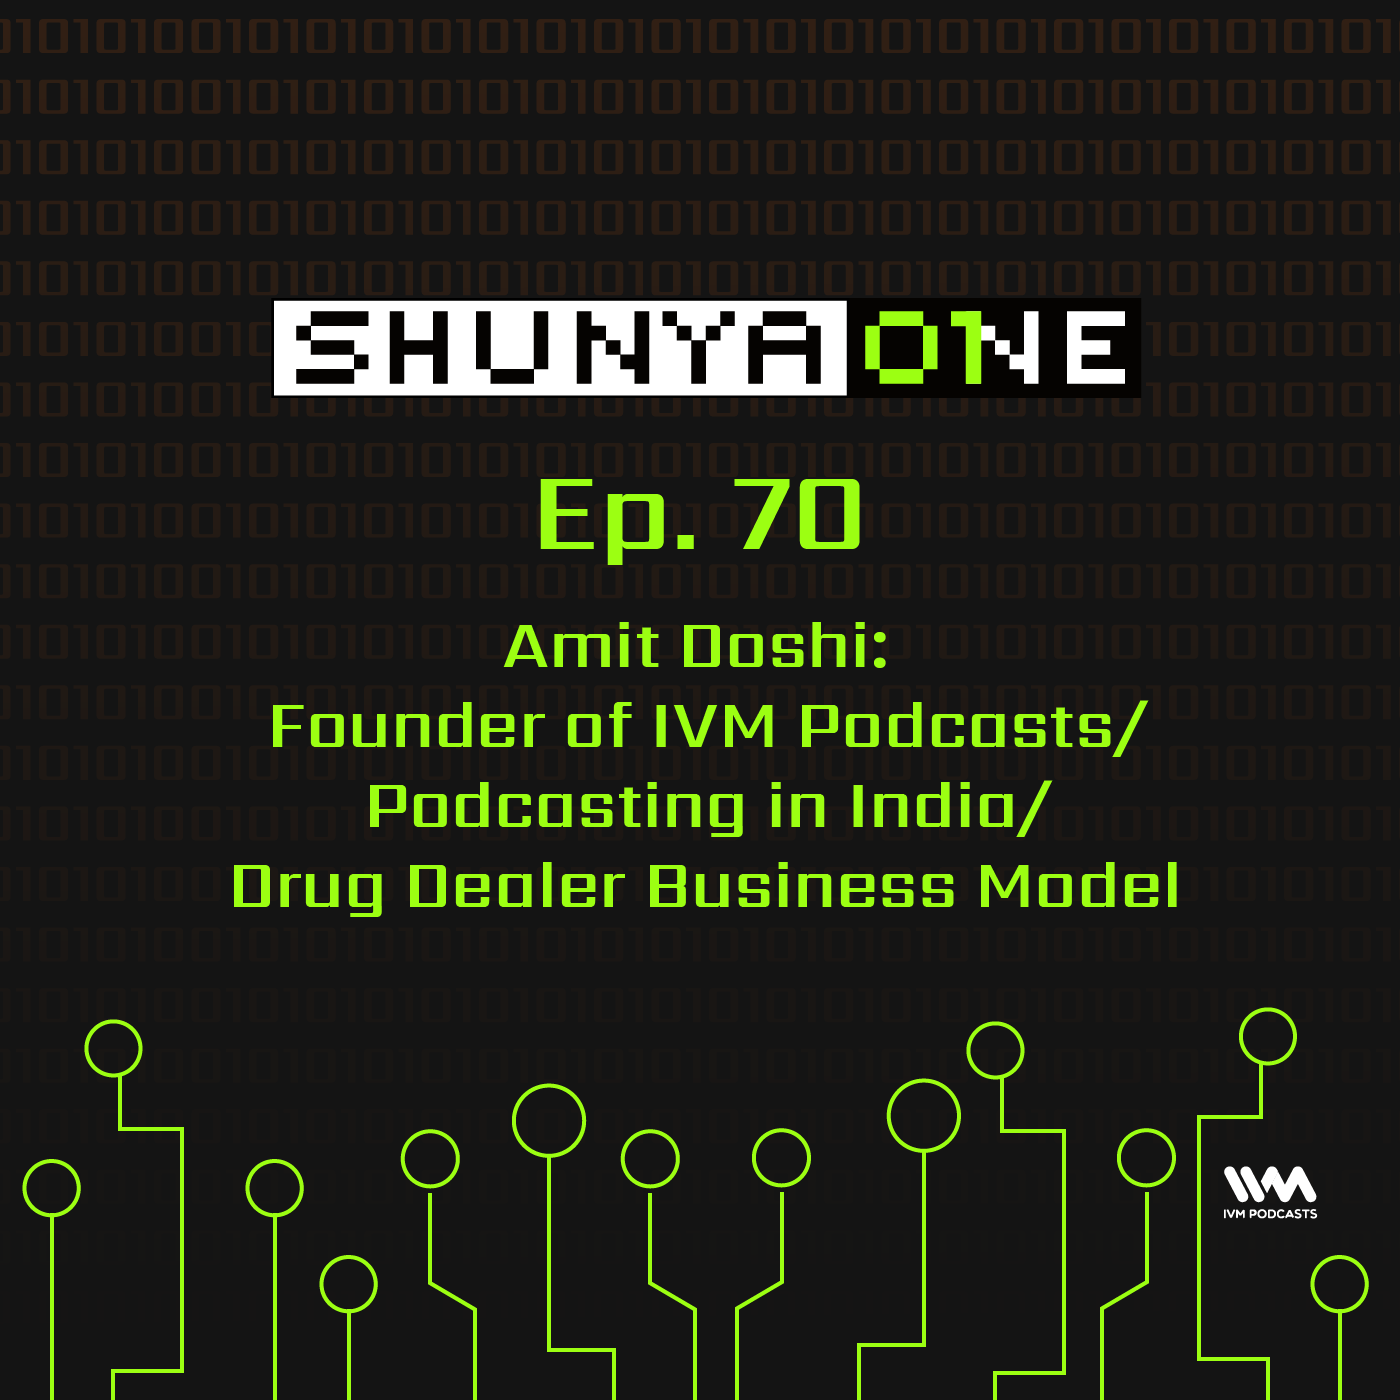 Feat. Amit Doshi: Founder of IVM Podcasts/Podcasting in India/Drug Dealer Business Model